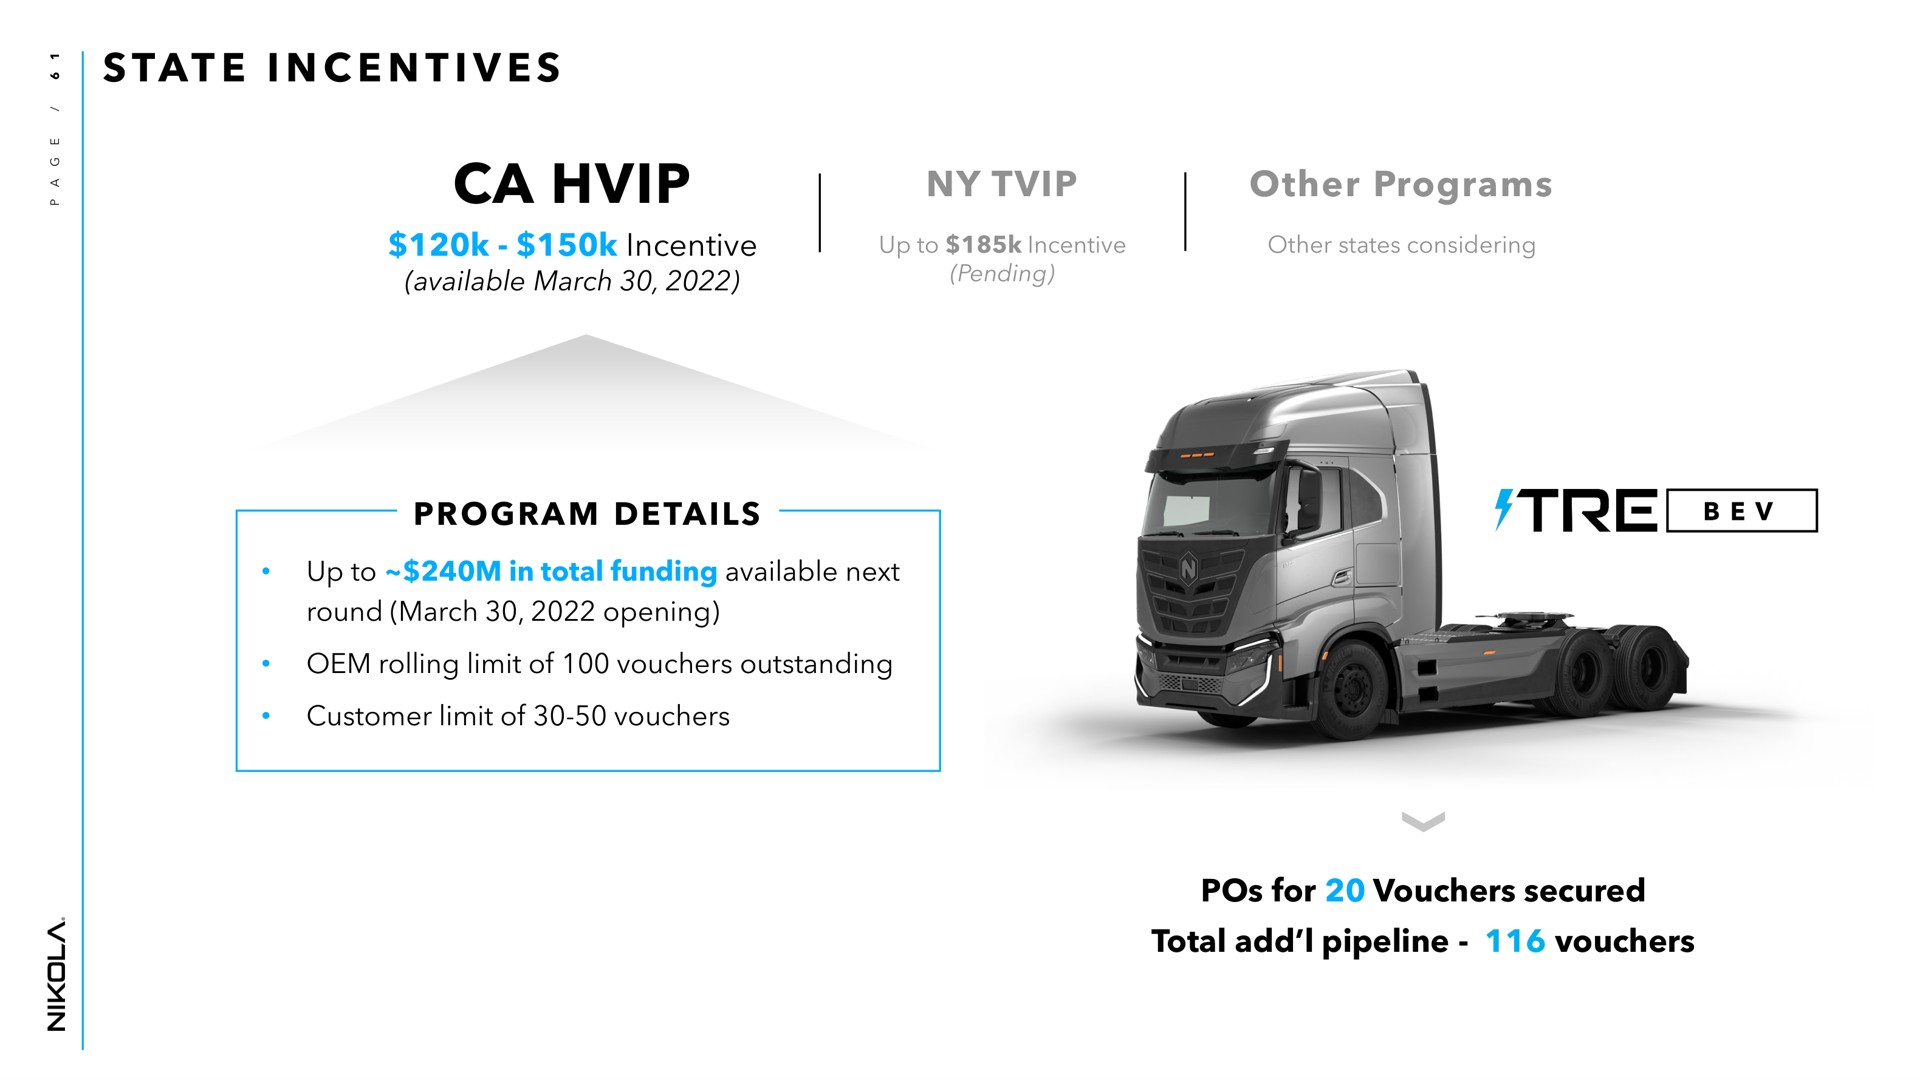 tat i i incentive other programs program details pos for vouchers secured total add pipeline vouchers state incentives available march pending up to in funding available next rolling limit of outstanding | Nikola